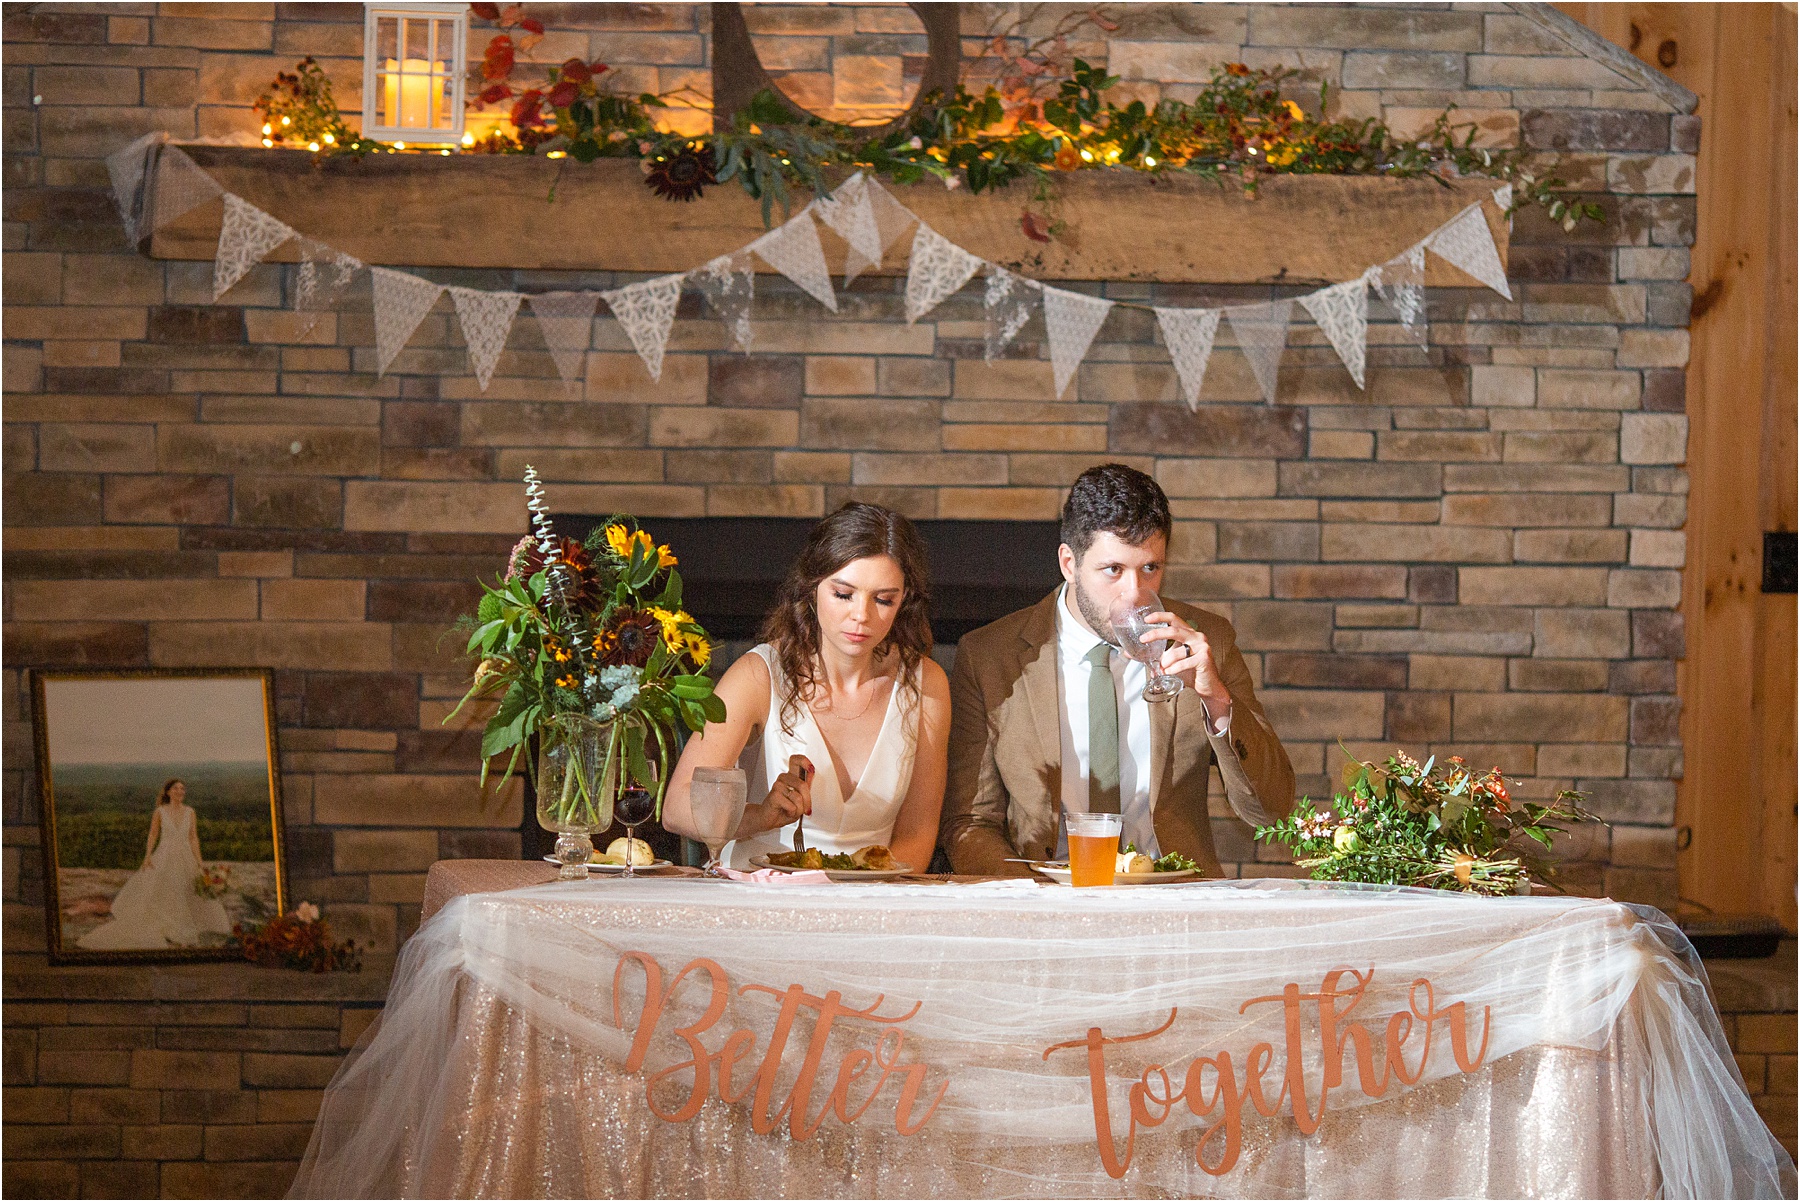 Newlyweds sitting at table in front of fireplace eating food